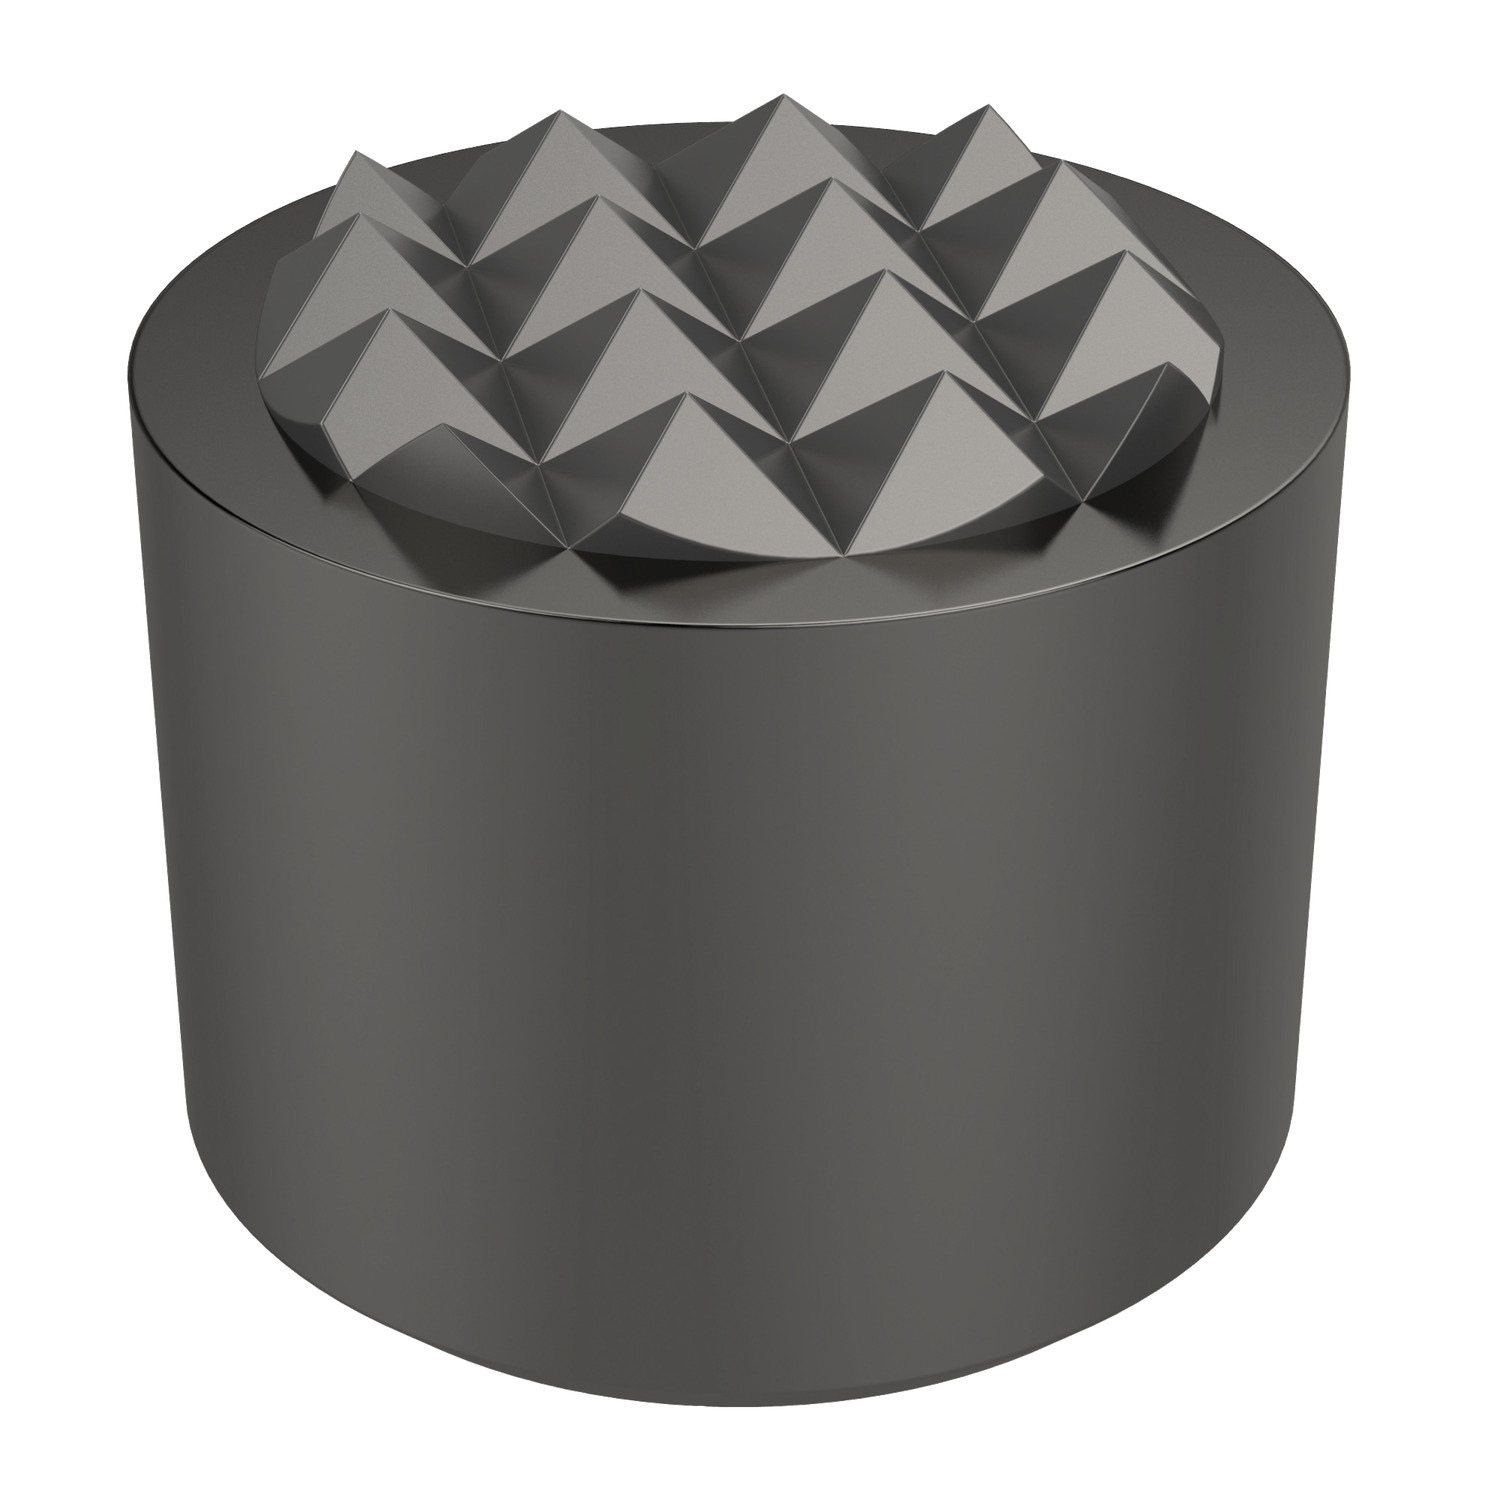 Grippers - Carbide Tipped Solid carbide tipped grippers in a steel body. Suitable for chicks, vices and robotic grippers for safe holding without distortion.